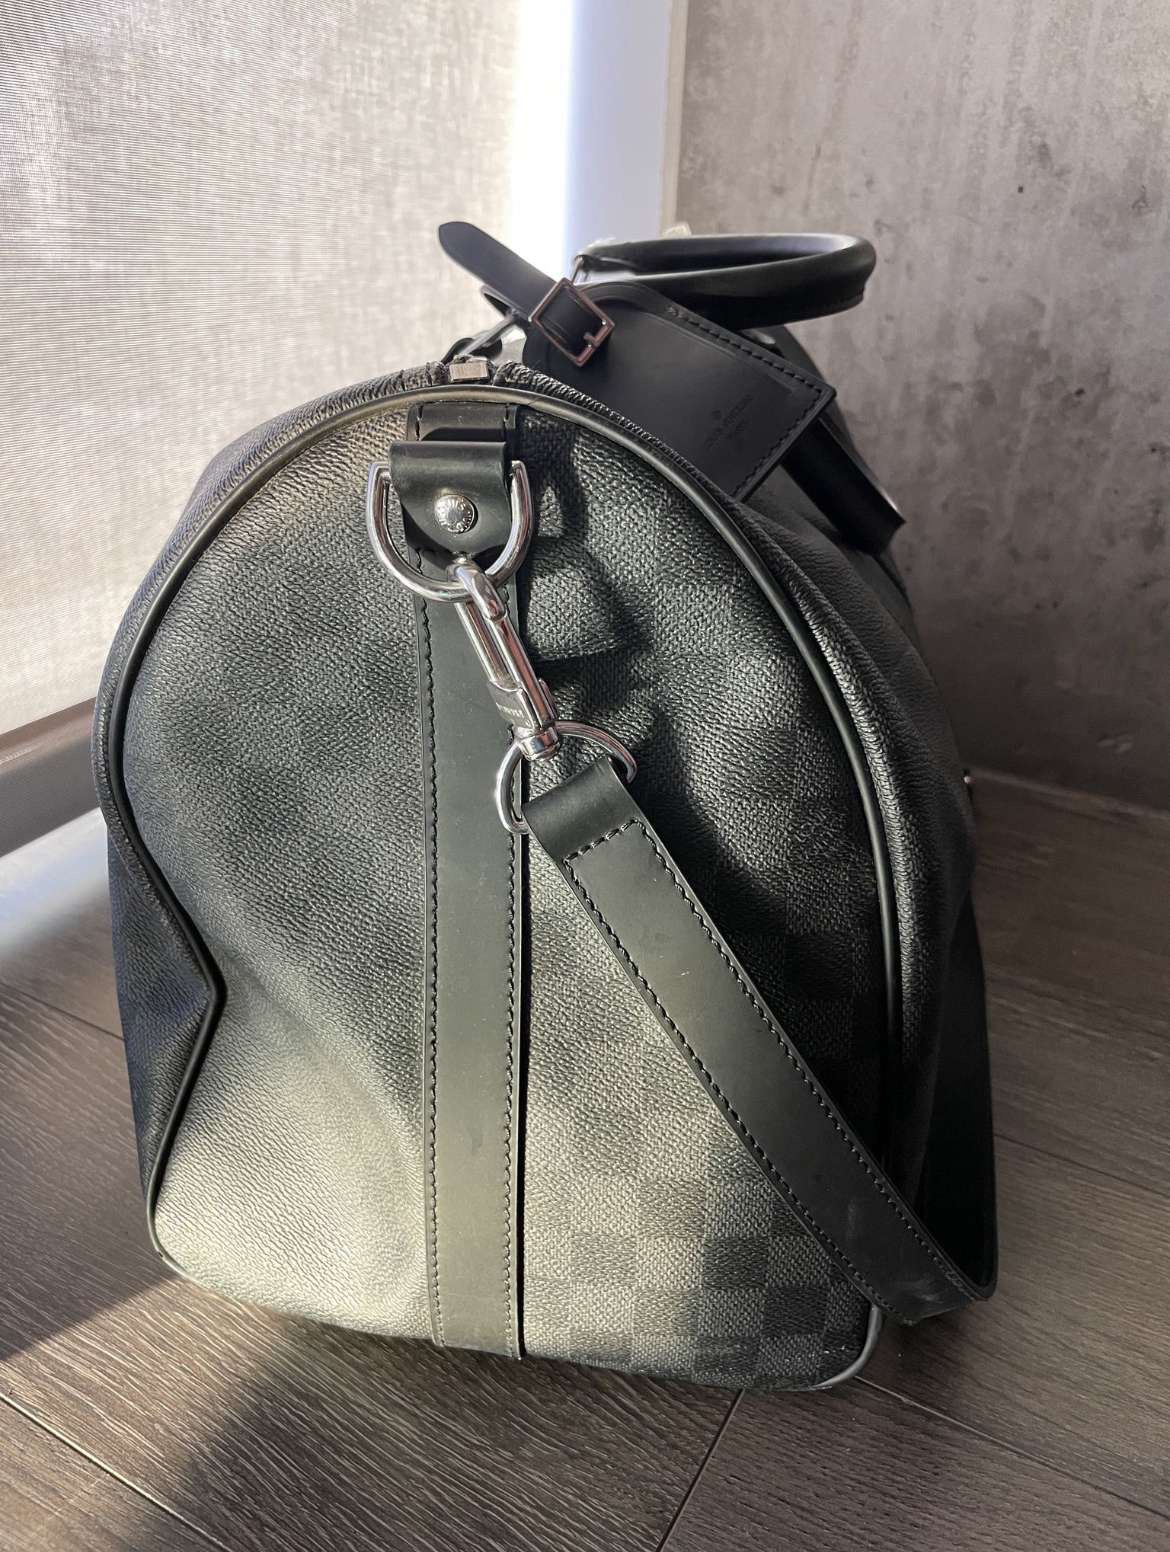 😍🙏😍Authentic Louis Vuitton Keepall 45 Gym Bag